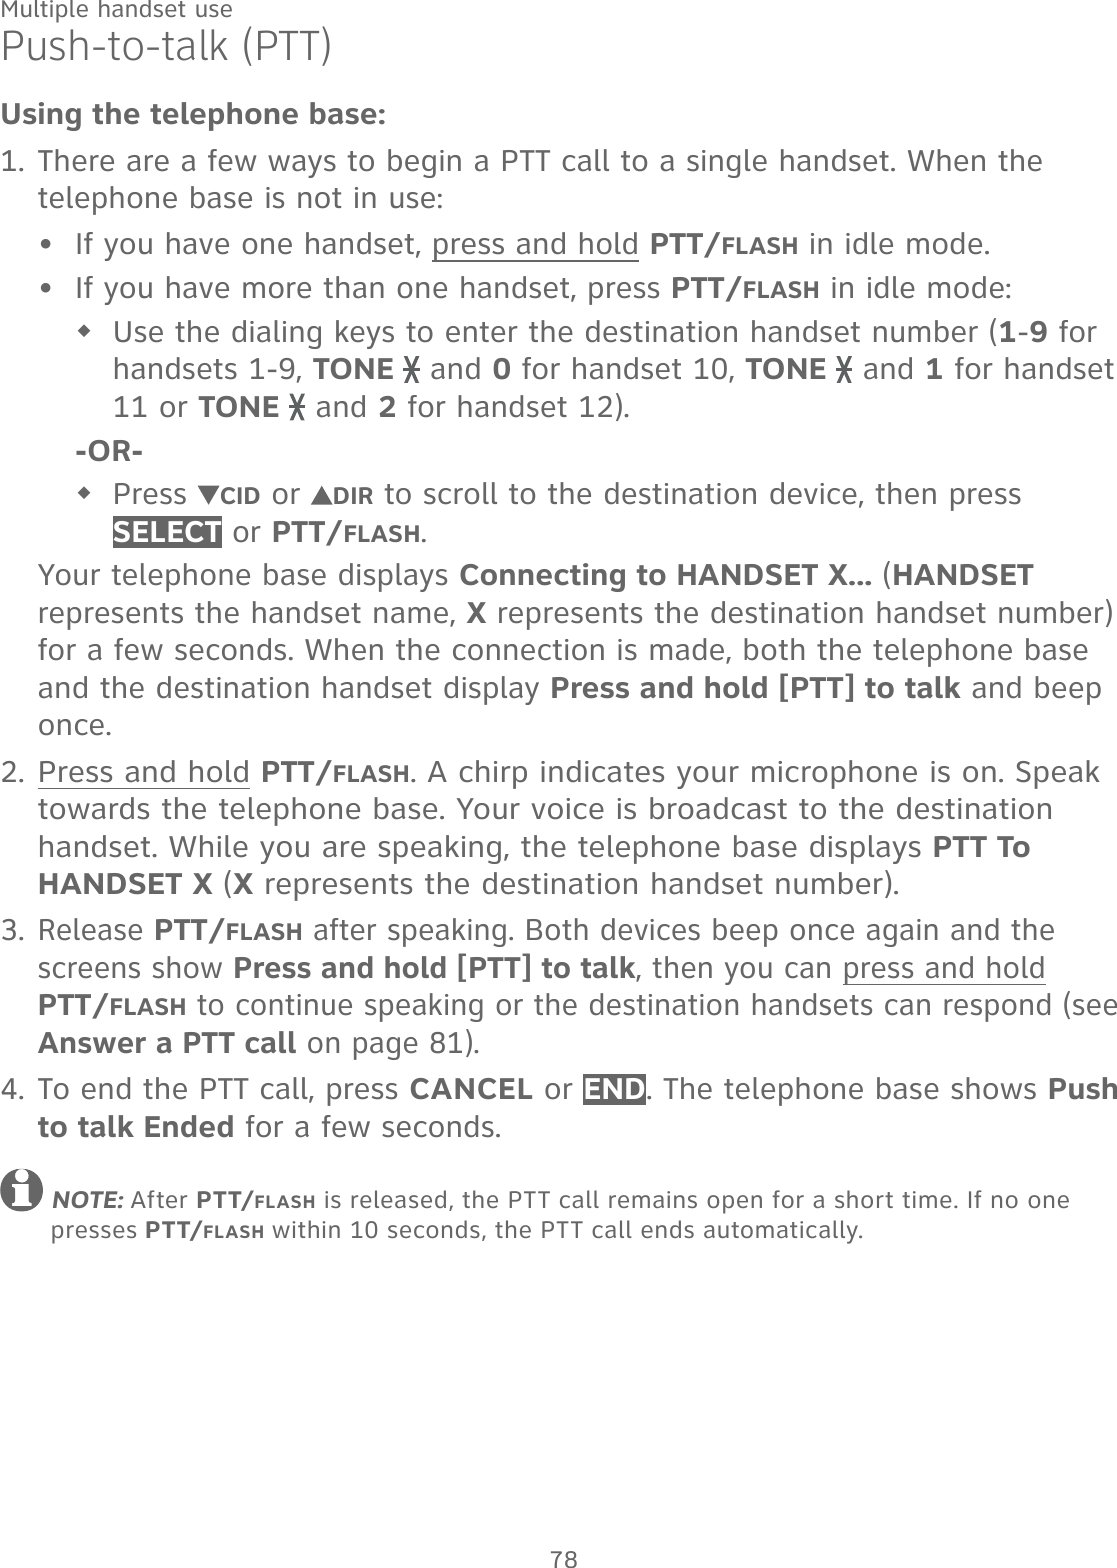 78Multiple handset usePush-to-talk (PTT)Using the telephone base:There are a few ways to begin a PTT call to a single handset. When the telephone base is not in use:If you have one handset, press and hold PTT/FLASH in idle mode.If you have more than one handset, press PTT/FLASH in idle mode:Use the dialing keys to enter the destination handset number (1-9 for handsets 1-9, TONE   and 0 for handset 10, TONE   and 1 for handset 11 or TONE   and 2 for handset 12). -OR-Press  CID or  DIR to scroll to the destination device, then press SELECT or PTT/FLASH.Your telephone base displays Connecting to HANDSET X... (HANDSET represents the handset name, X represents the destination handset number) for a few seconds. When the connection is made, both the telephone base and the destination handset display Press and hold [PTT] to talk and beep once.Press and hold PTT/FLASH. A chirp indicates your microphone is on. Speak towards the telephone base. Your voice is broadcast to the destination handset. While you are speaking, the telephone base displays PTT To HANDSET X (X represents the destination handset number).Release PTT/FLASH after speaking. Both devices beep once again and the screens show Press and hold [PTT] to talk, then you can press and hold PTT/FLASH to continue speaking or the destination handsets can respond (see Answer a PTT call on page 81).To end the PTT call, press CANCEL or END. The telephone base shows Push to talk Ended for a few seconds. NOTE: After PTT/FLASH is released, the PTT call remains open for a short time. If no one presses PTT/FLASH within 10 seconds, the PTT call ends automatically.1.••2.3.4.